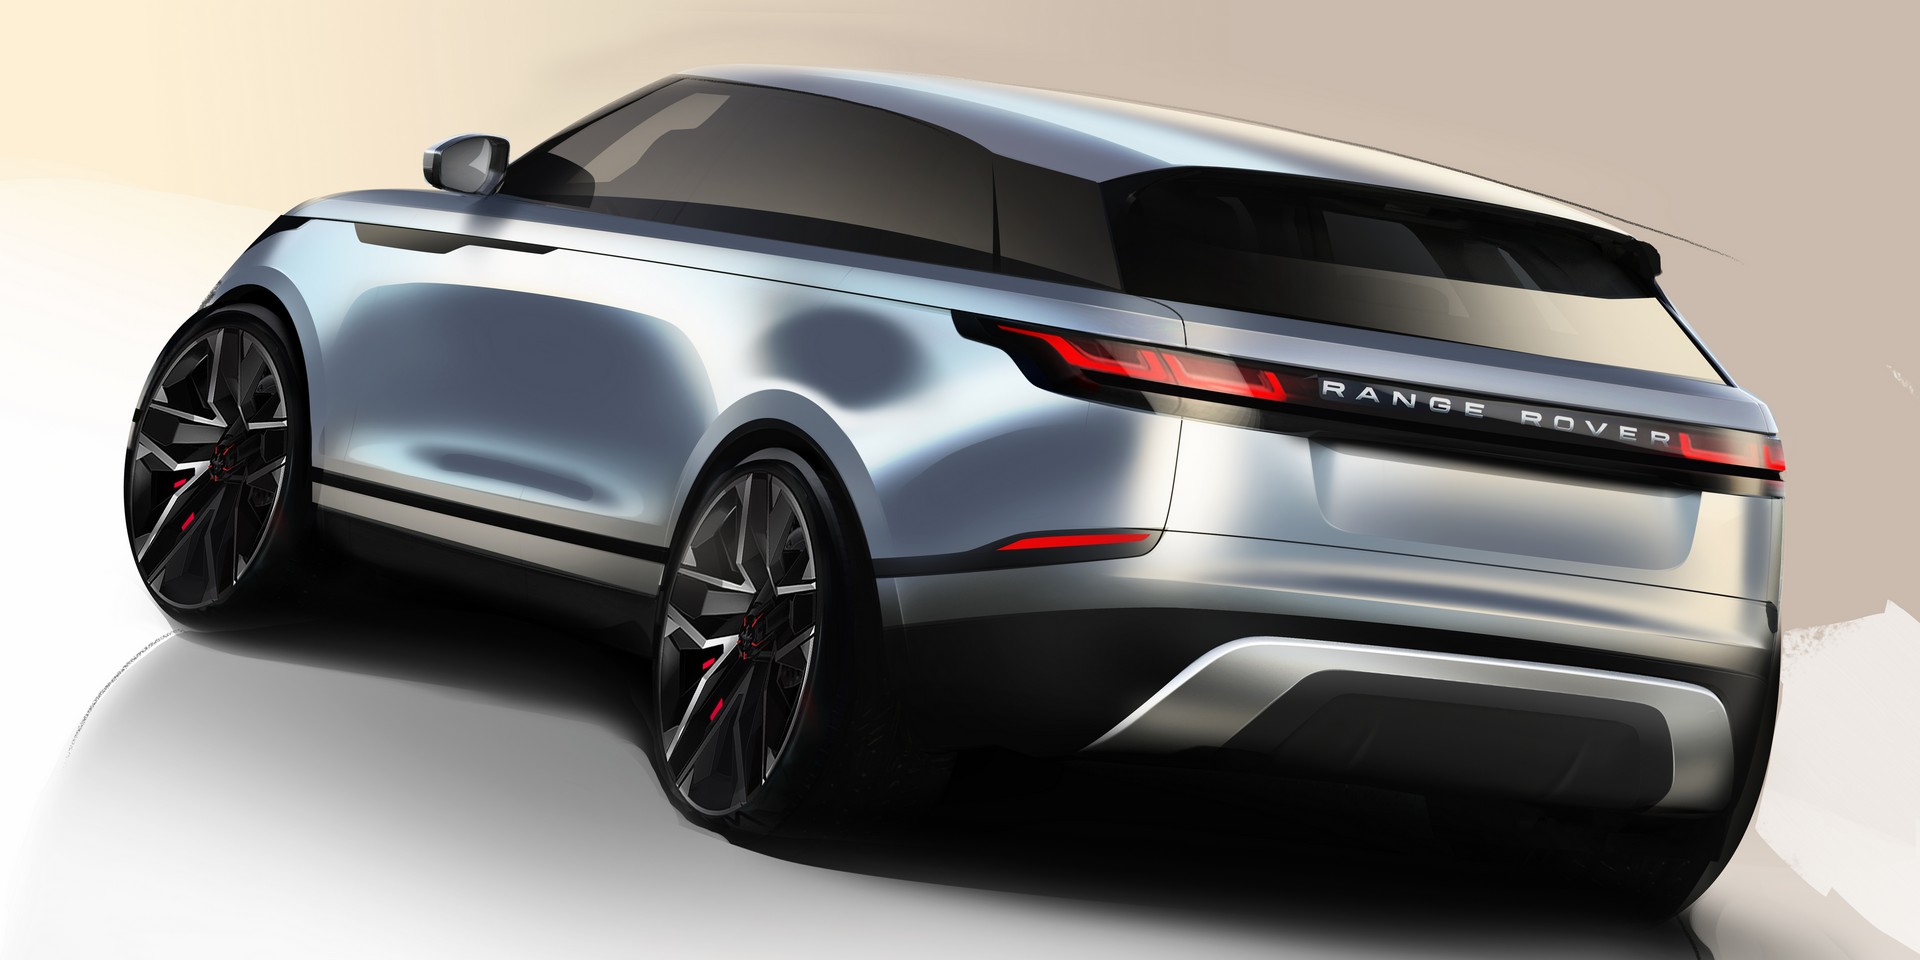 range rover set to launch its first electric vehicle in